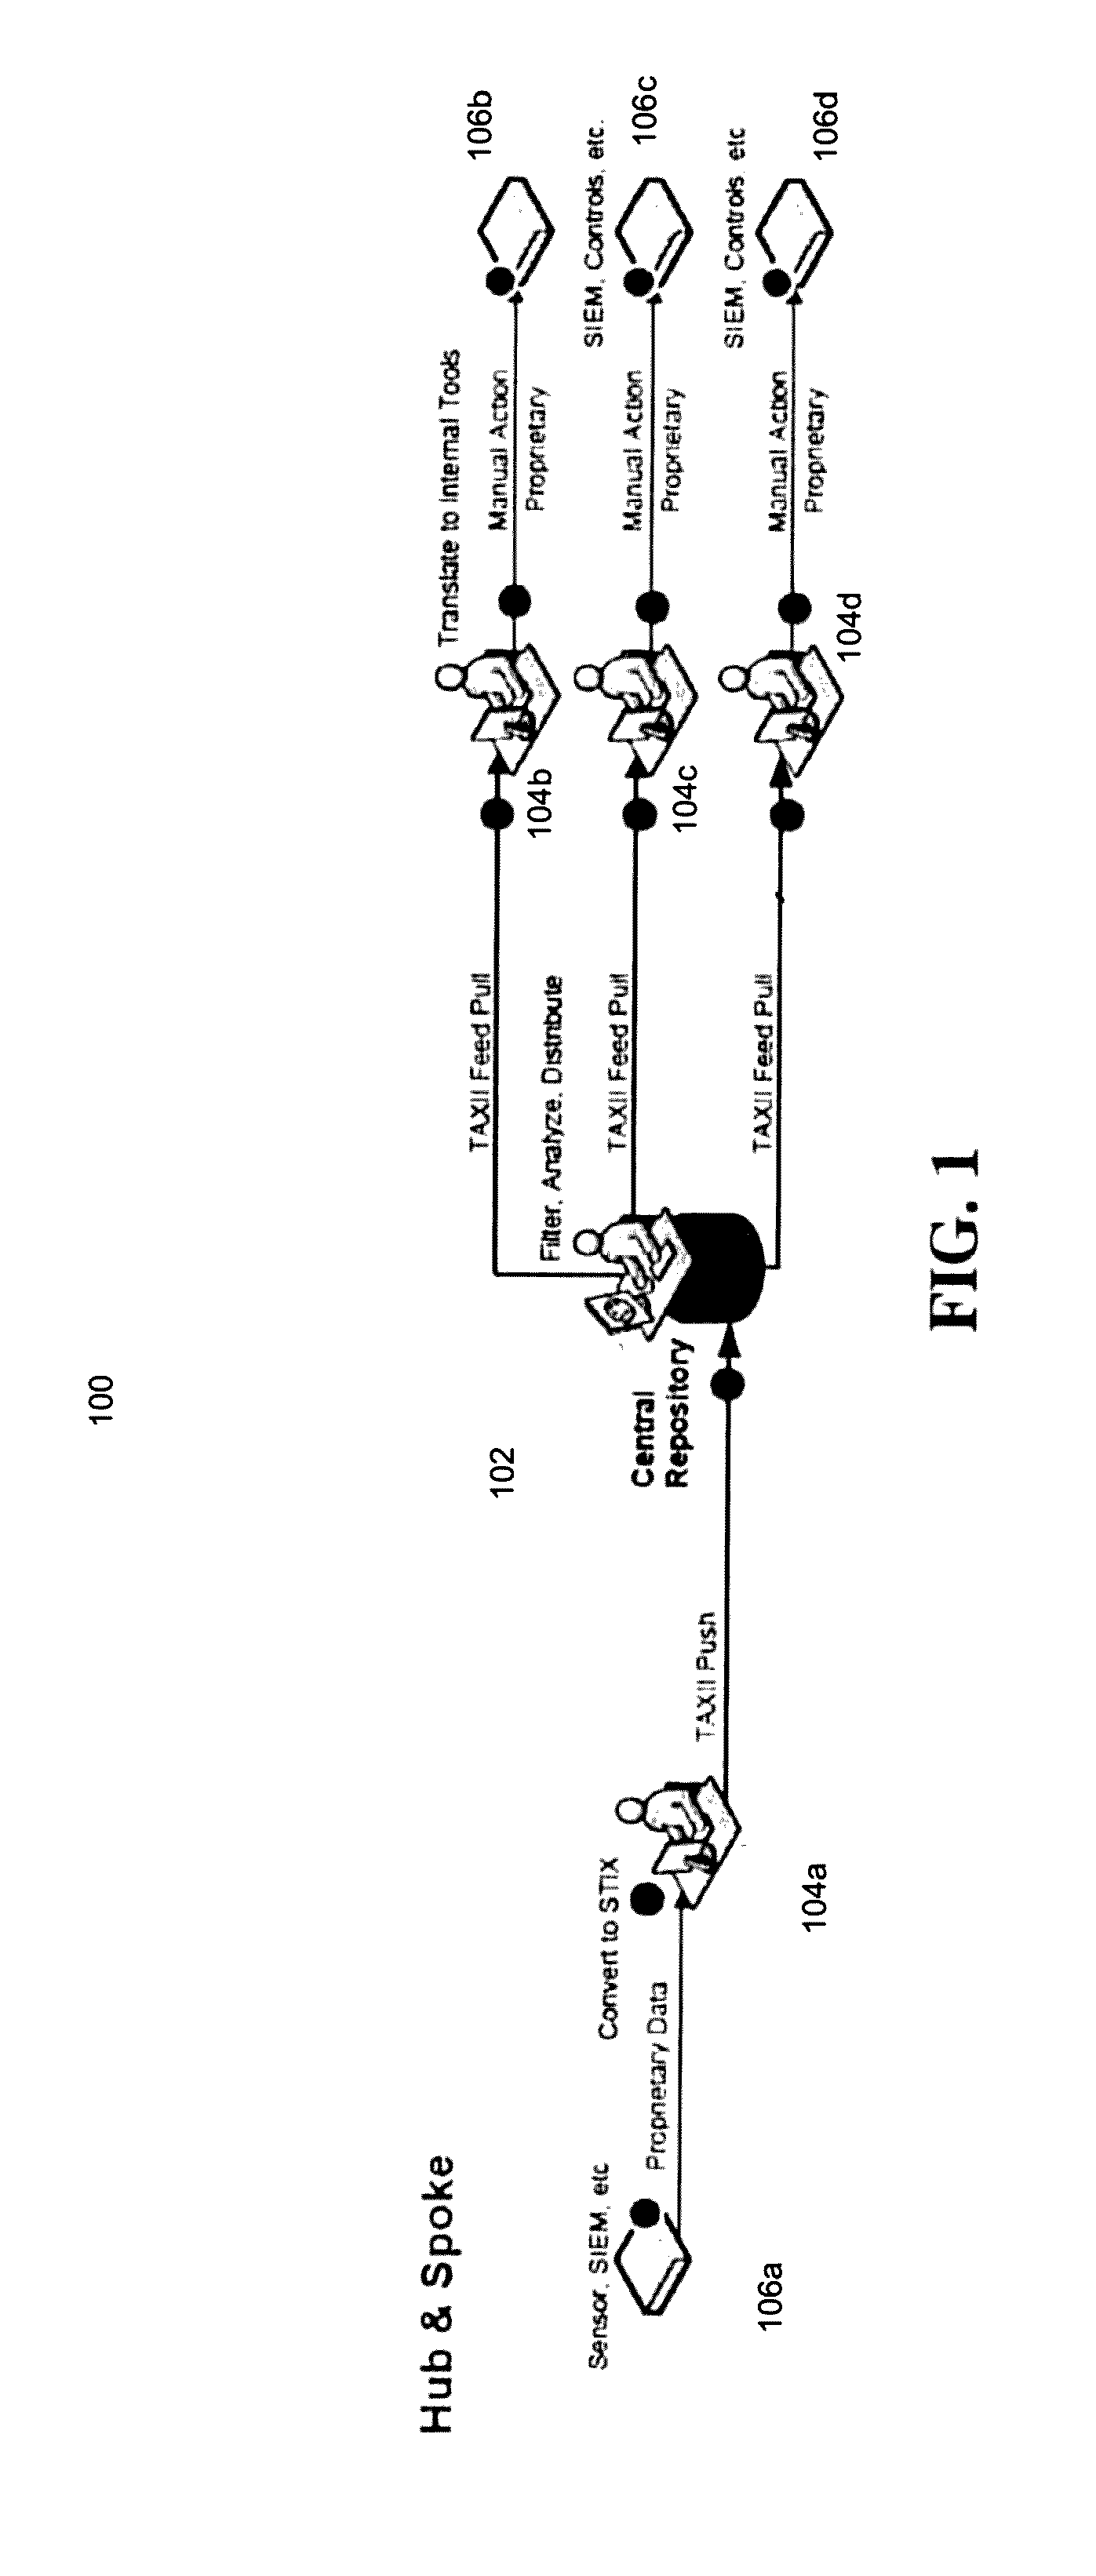 Computerized system and method for securely distributing and exchanging cyber-threat information in a standardized format